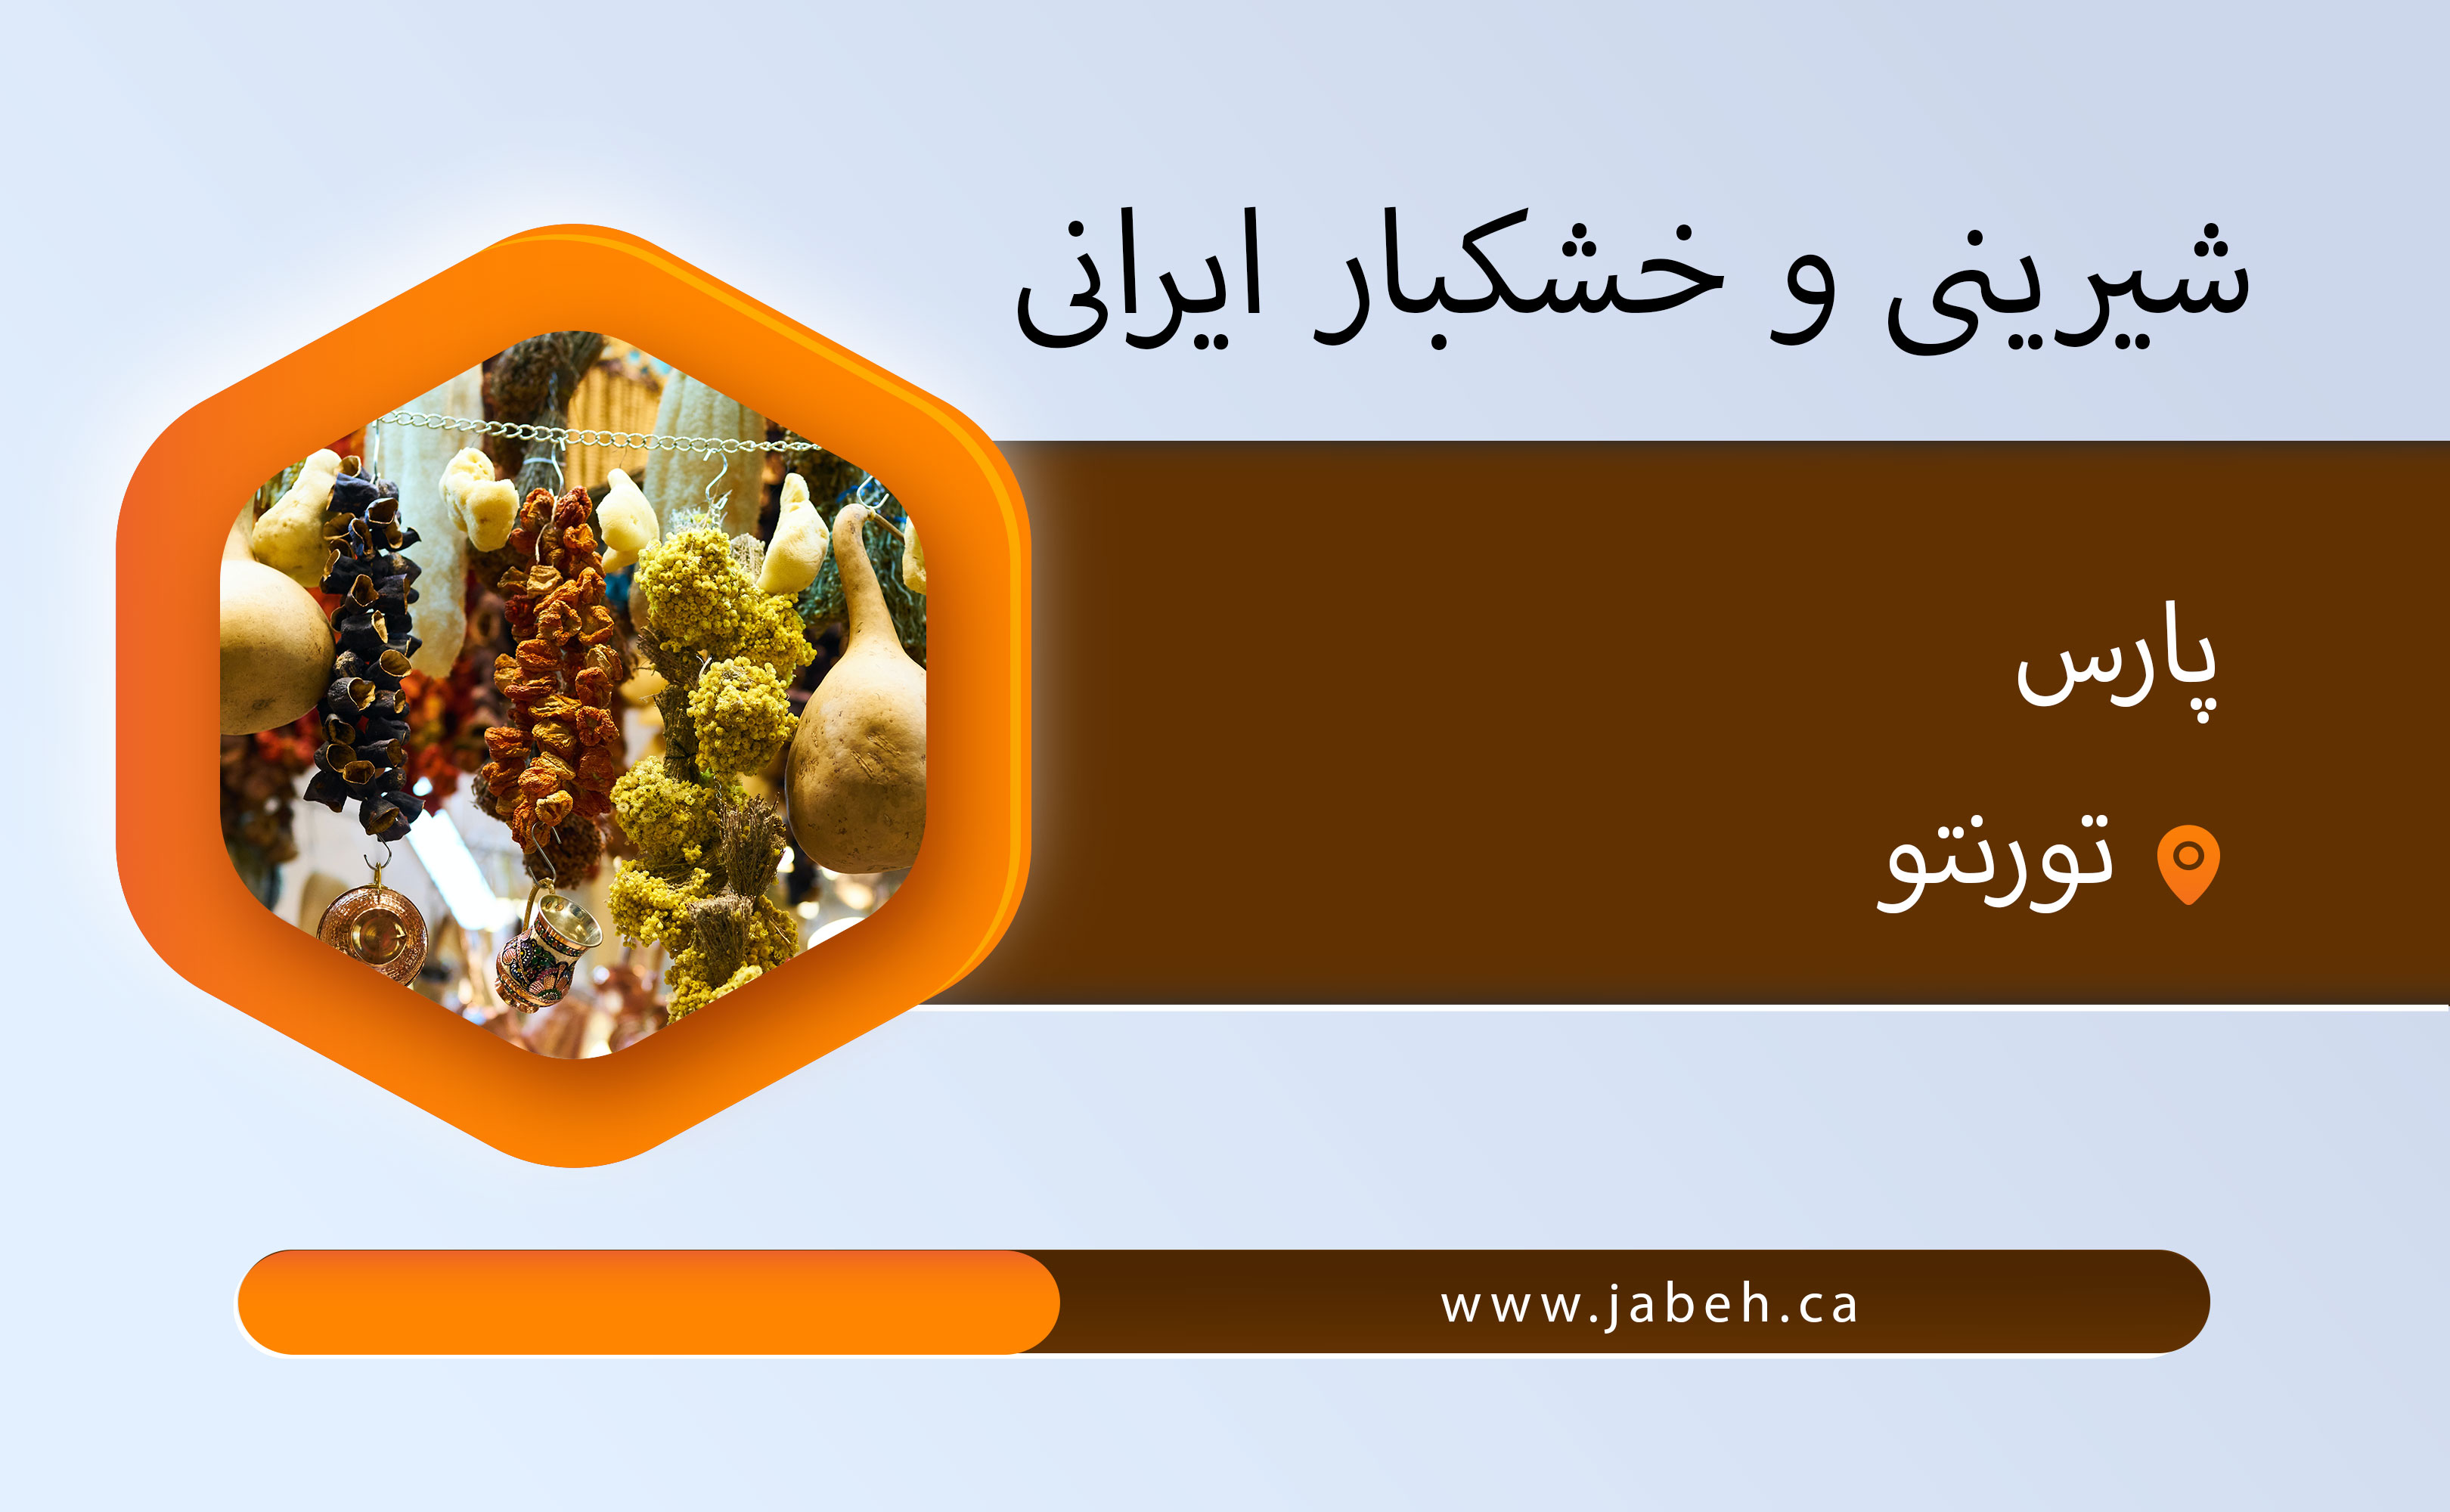 Persian sweets and dry fruits in Toronto